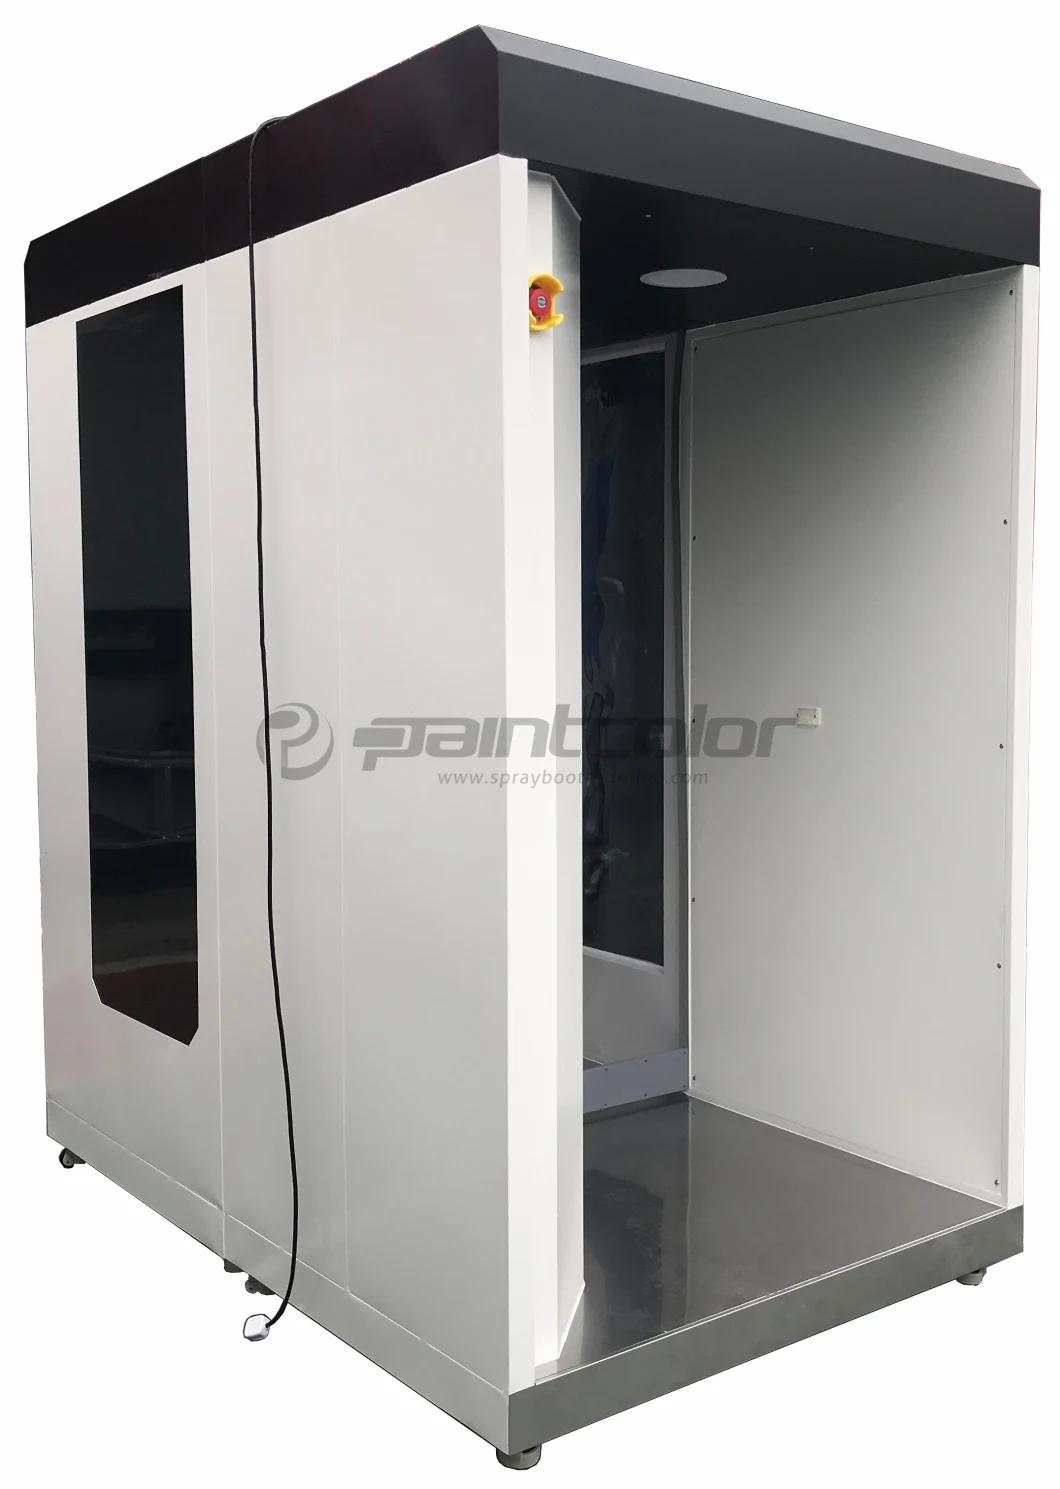 Atomization Disinfection Booth and Sanitizing Booth for Body by Harmless Disinfectant Fluid